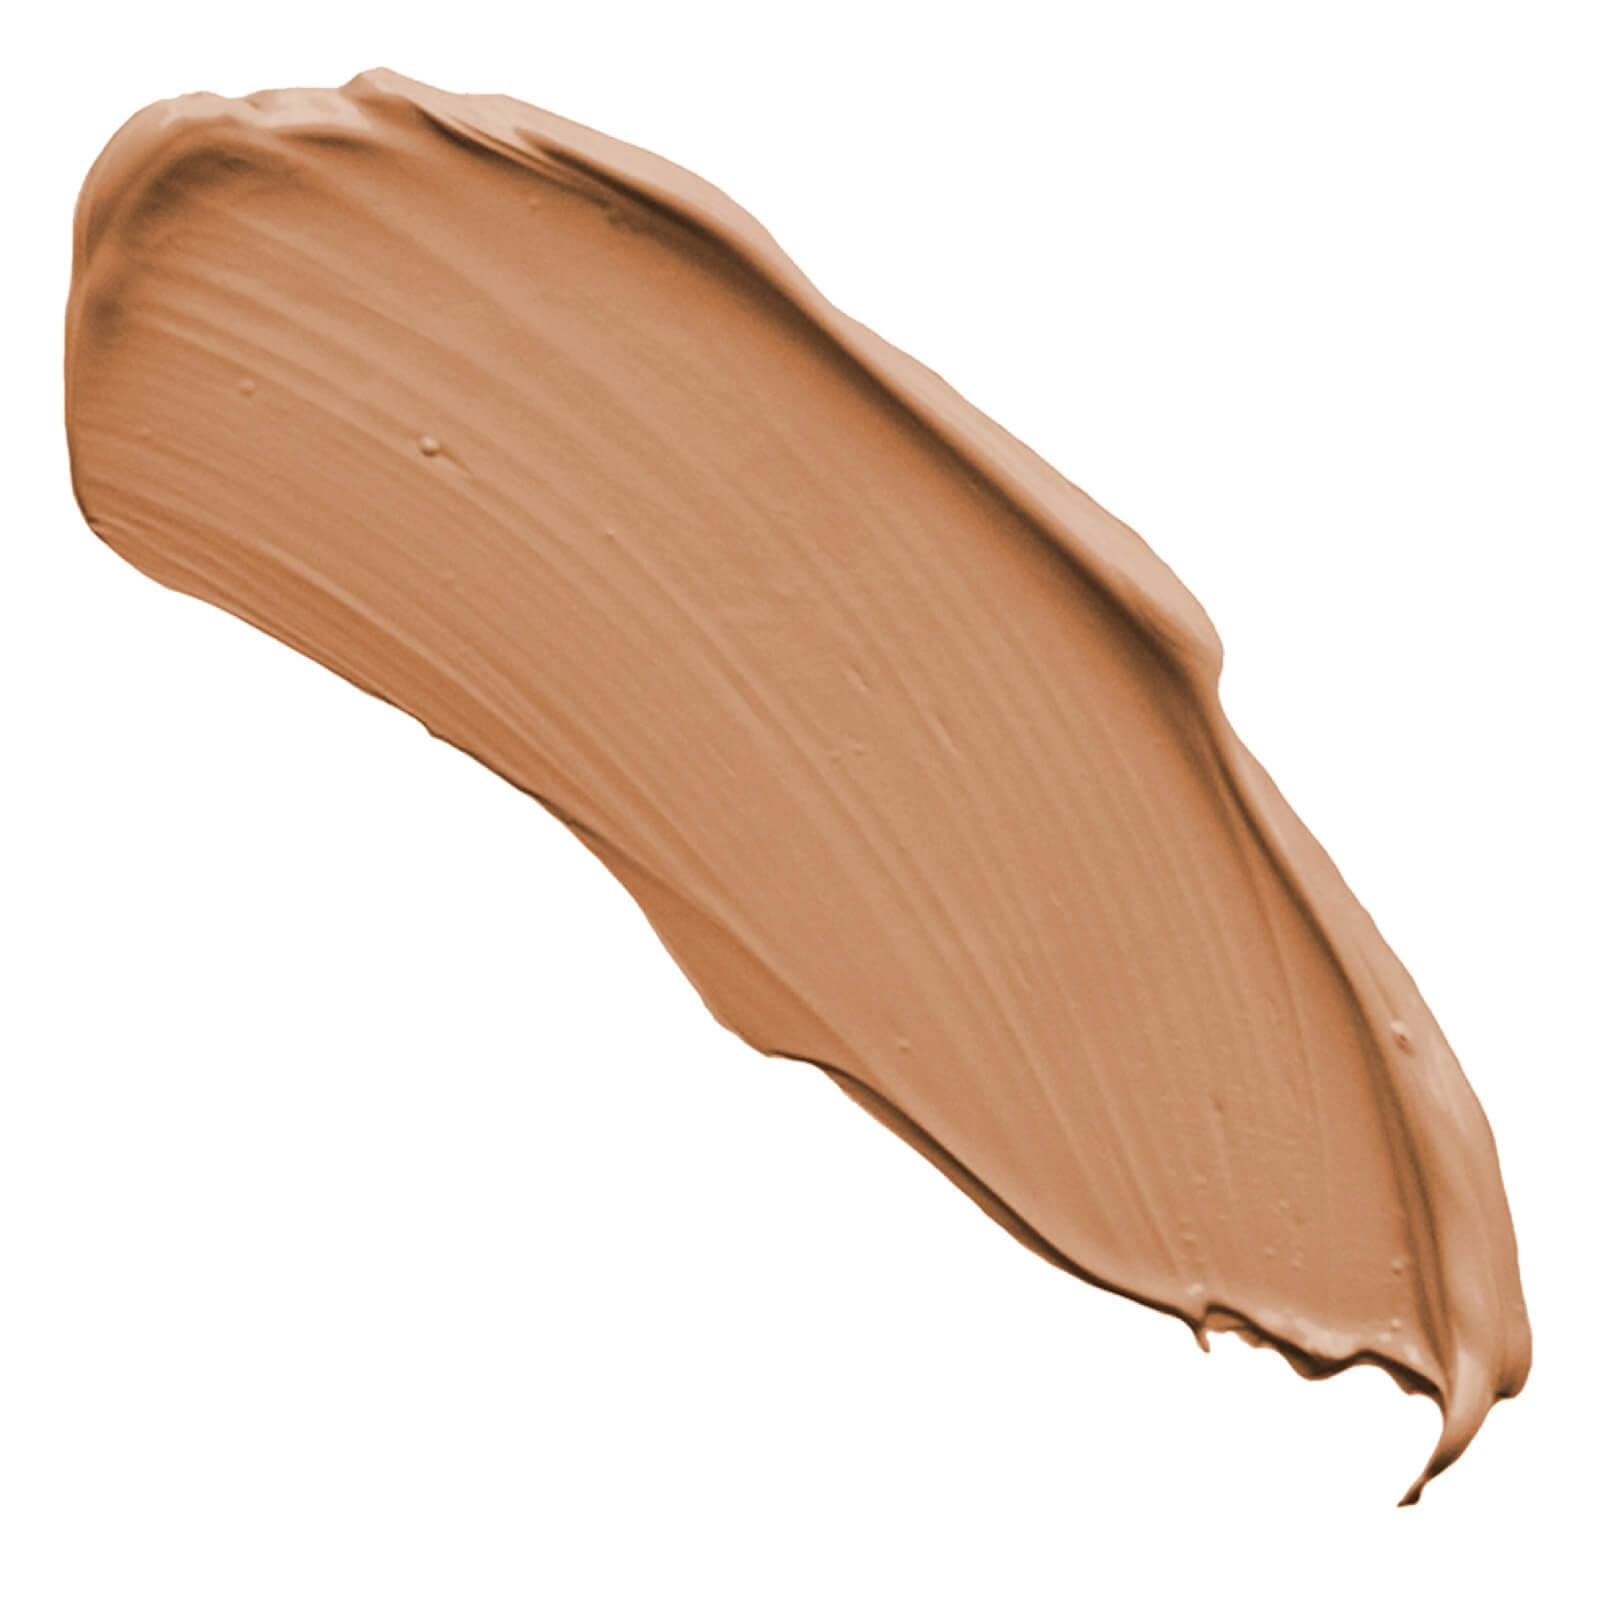 Lottie London Got It Covered Concealer (Various Shades) - 1 Sable